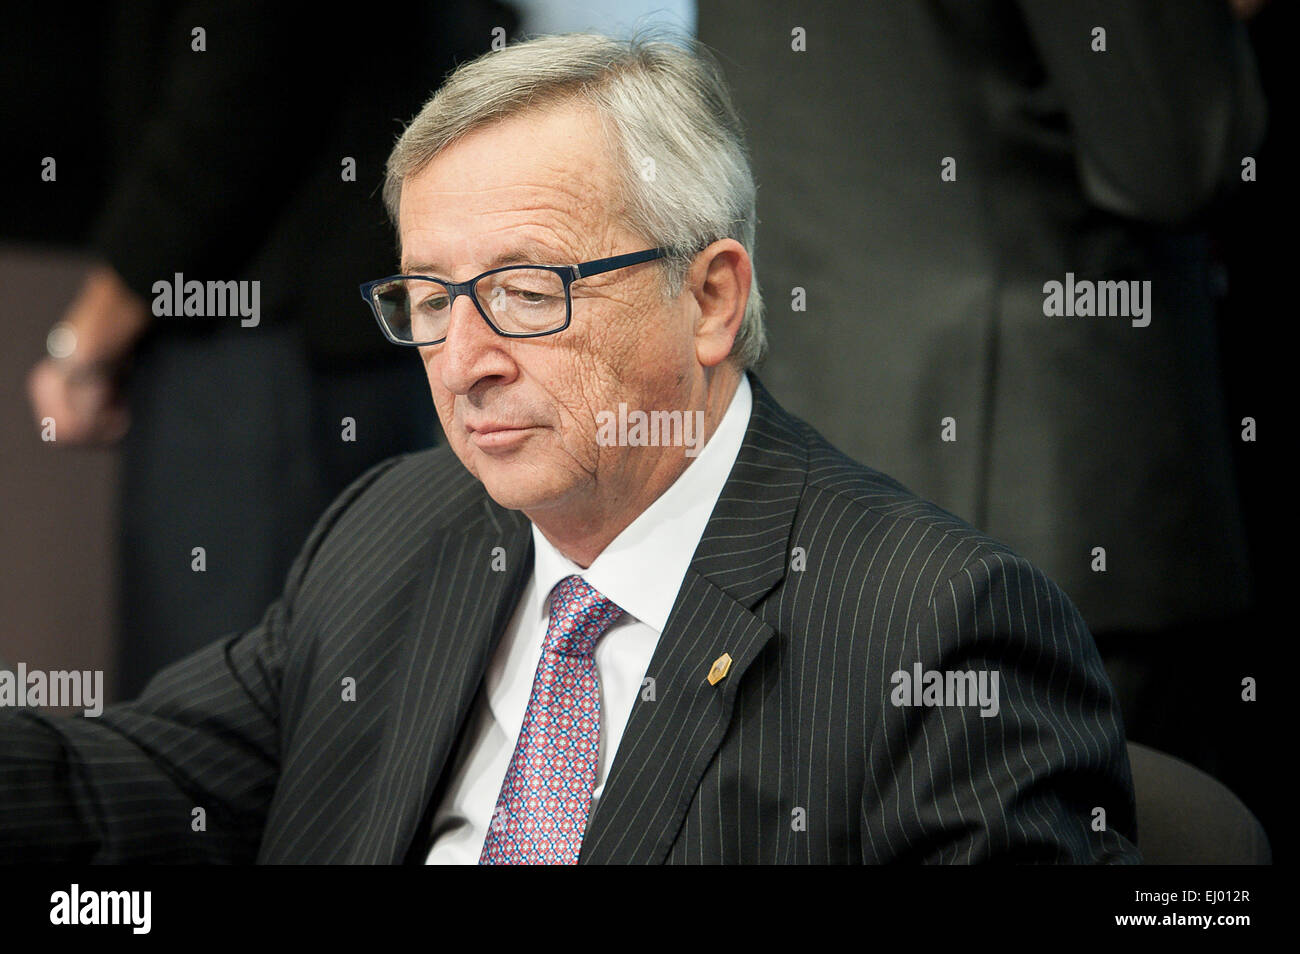 Brussels, Belgium. 19th March, 2015. Jean-Claude Juncker, the president of the European Commission at the start of a Tripartite Social Summit ahead of the EU Summit in Brussels, Belgium on 19.03.2015. Credit:  ZUMA Press, Inc./Alamy Live News Stock Photo